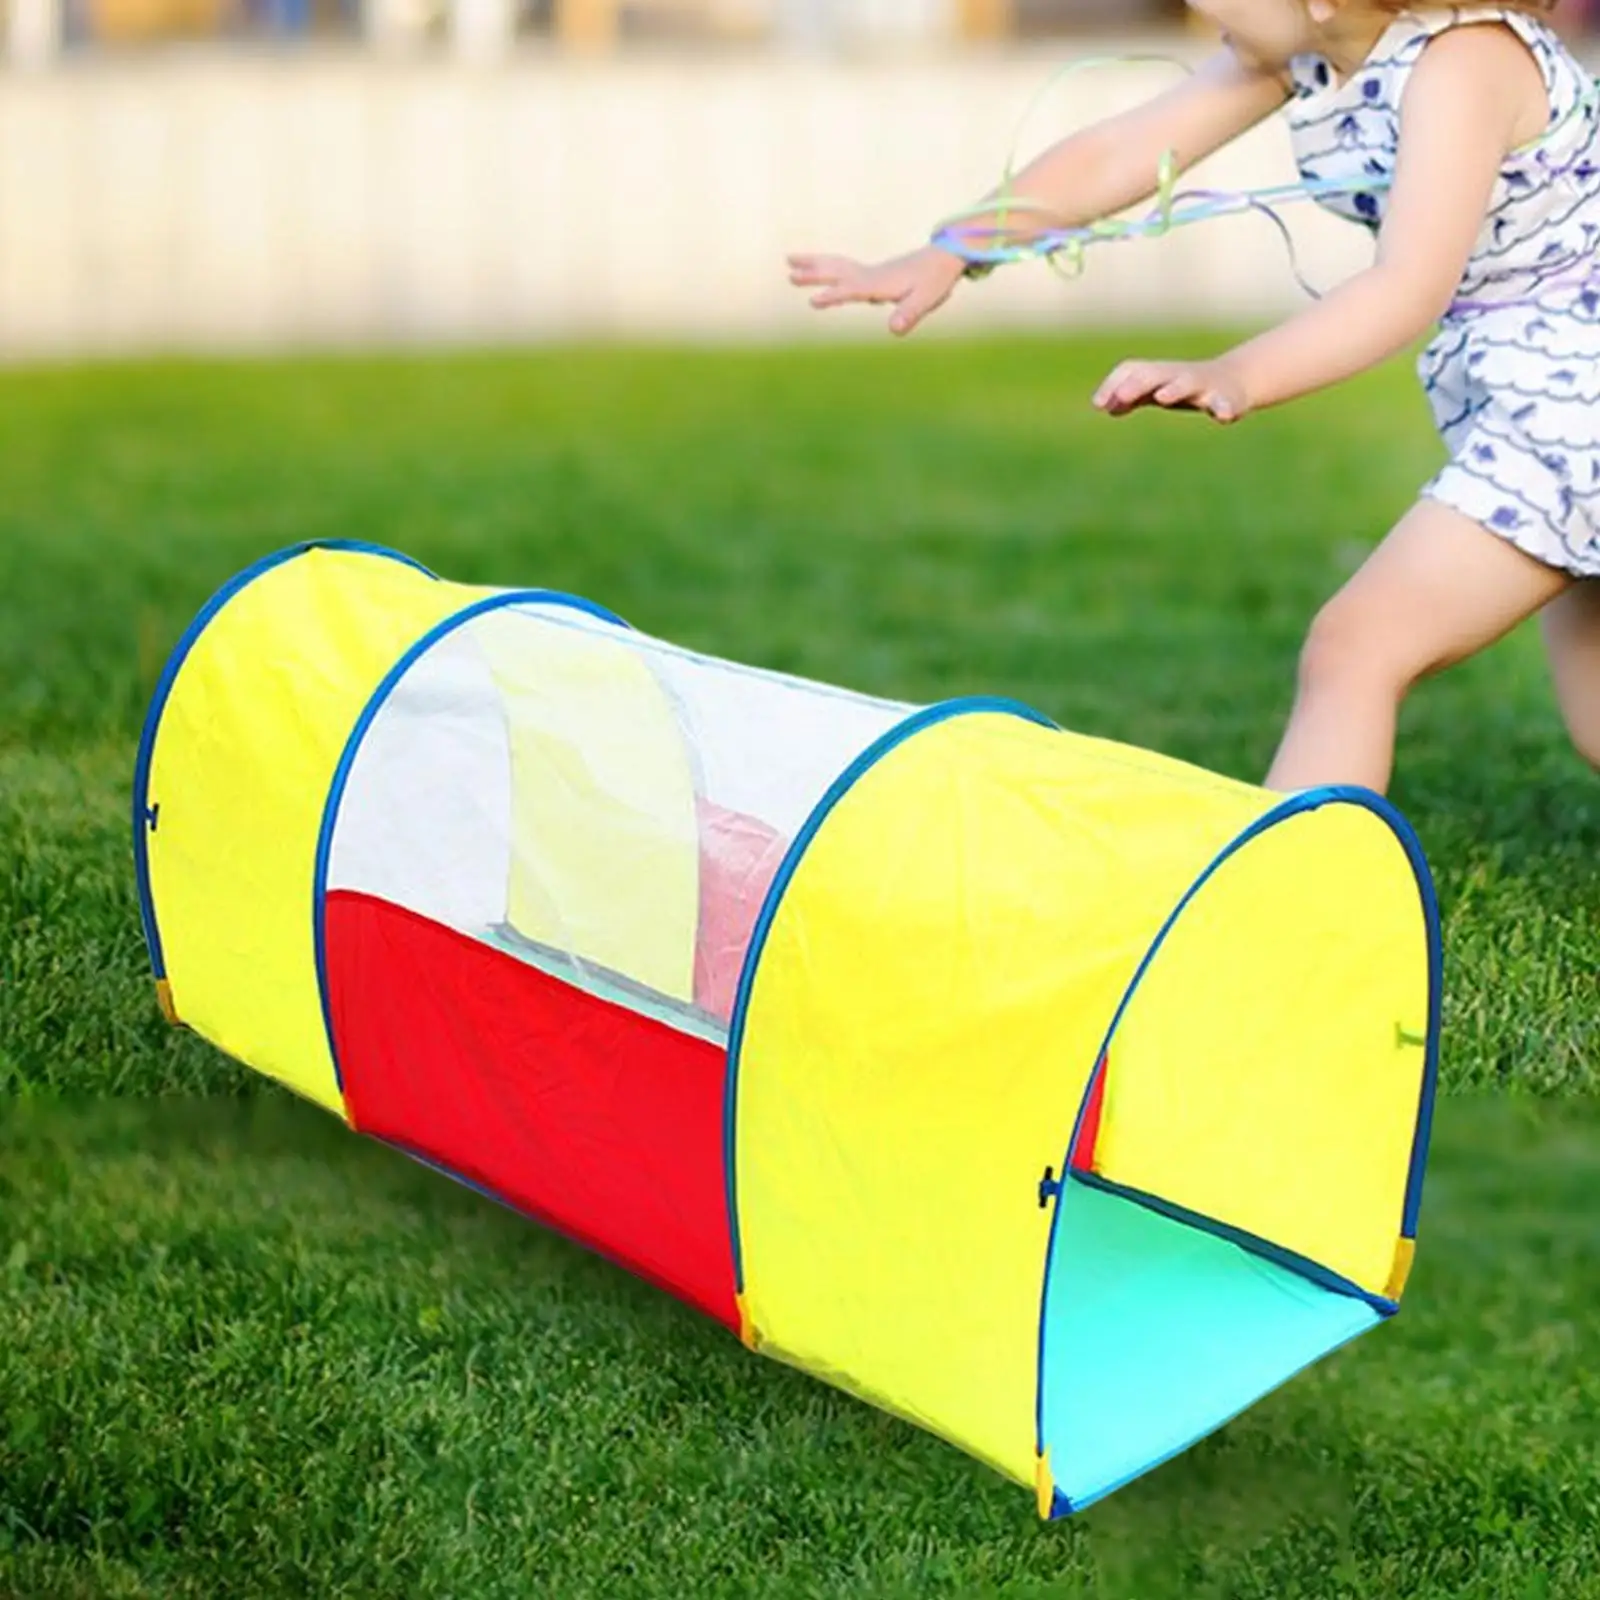 Portable Play Tent Toy Indoor Outdoor Toy Climbing Toy Collapsible Tunnel Arch Tunnel for Children Girls Boys Toddlers Infants